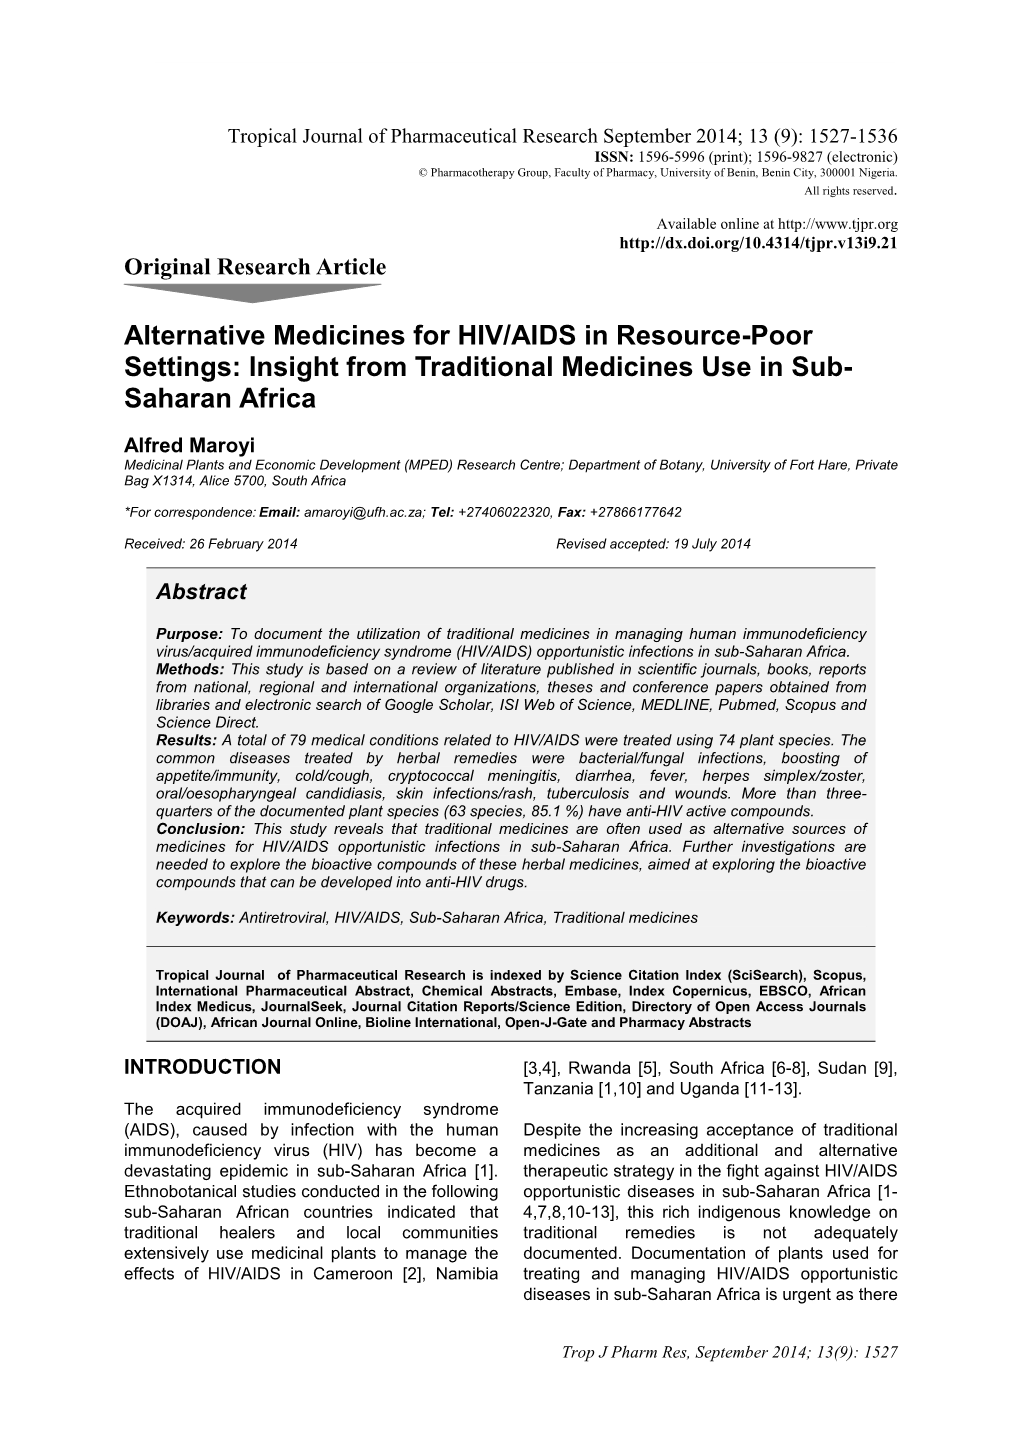 Alternative Medicines for HIV/AIDS in Resource-Poor Settings: Insight from Traditional Medicines Use in Sub- Saharan Africa